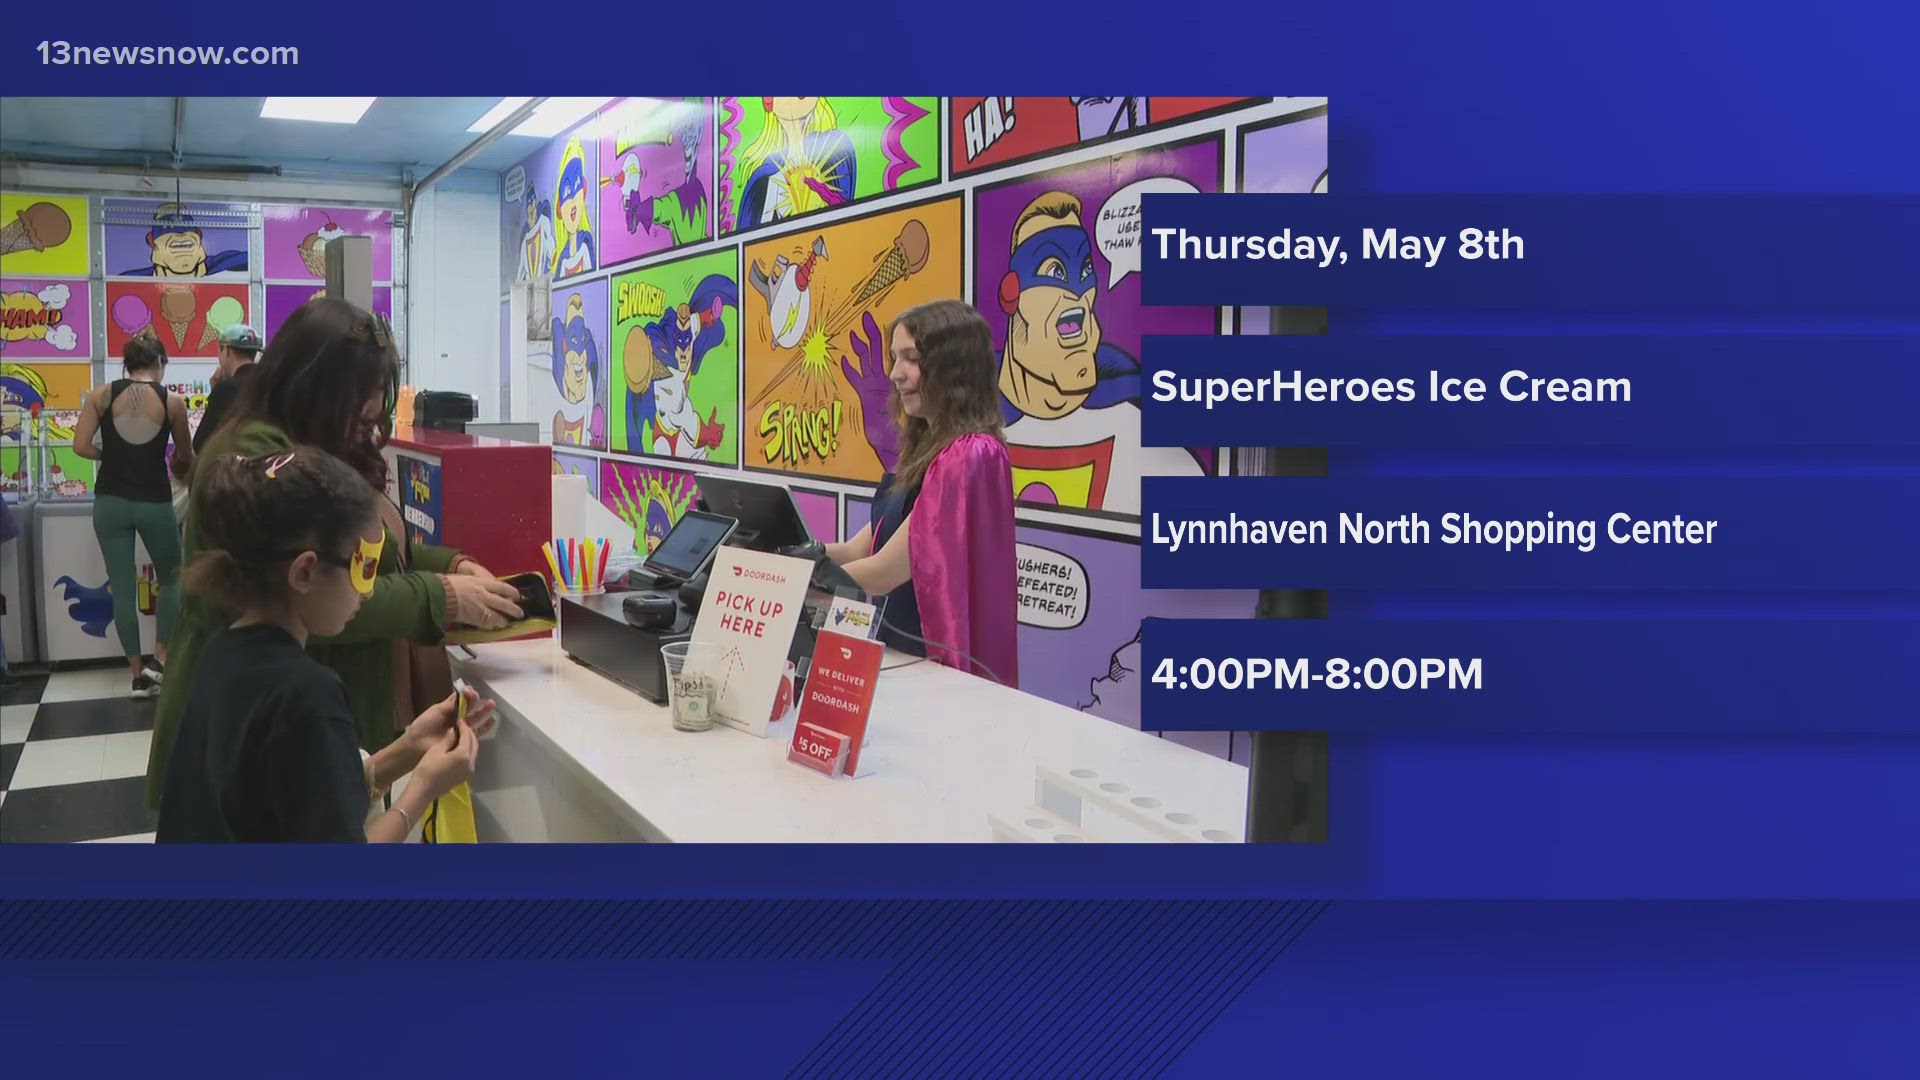 A Virginia Beach ice cream shop will hold a fundraiser for the Thornhill family.